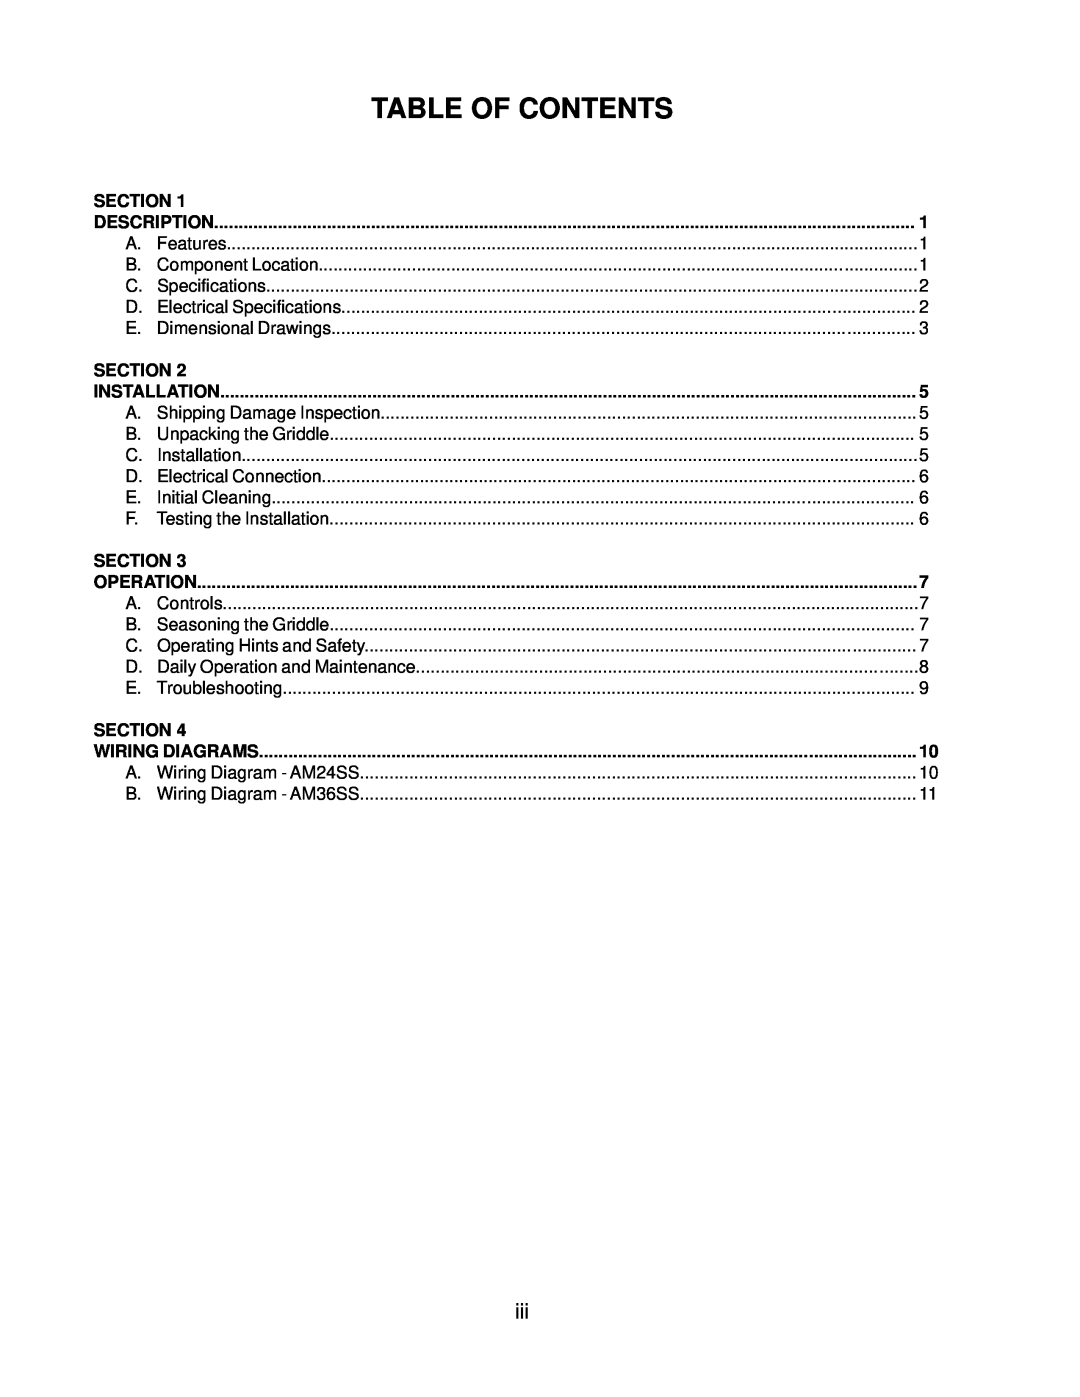 Toastmaster AM36SS, AM24SS installation manual Table Of Contents, Description, Installation, Operation, Wiring Diagrams 